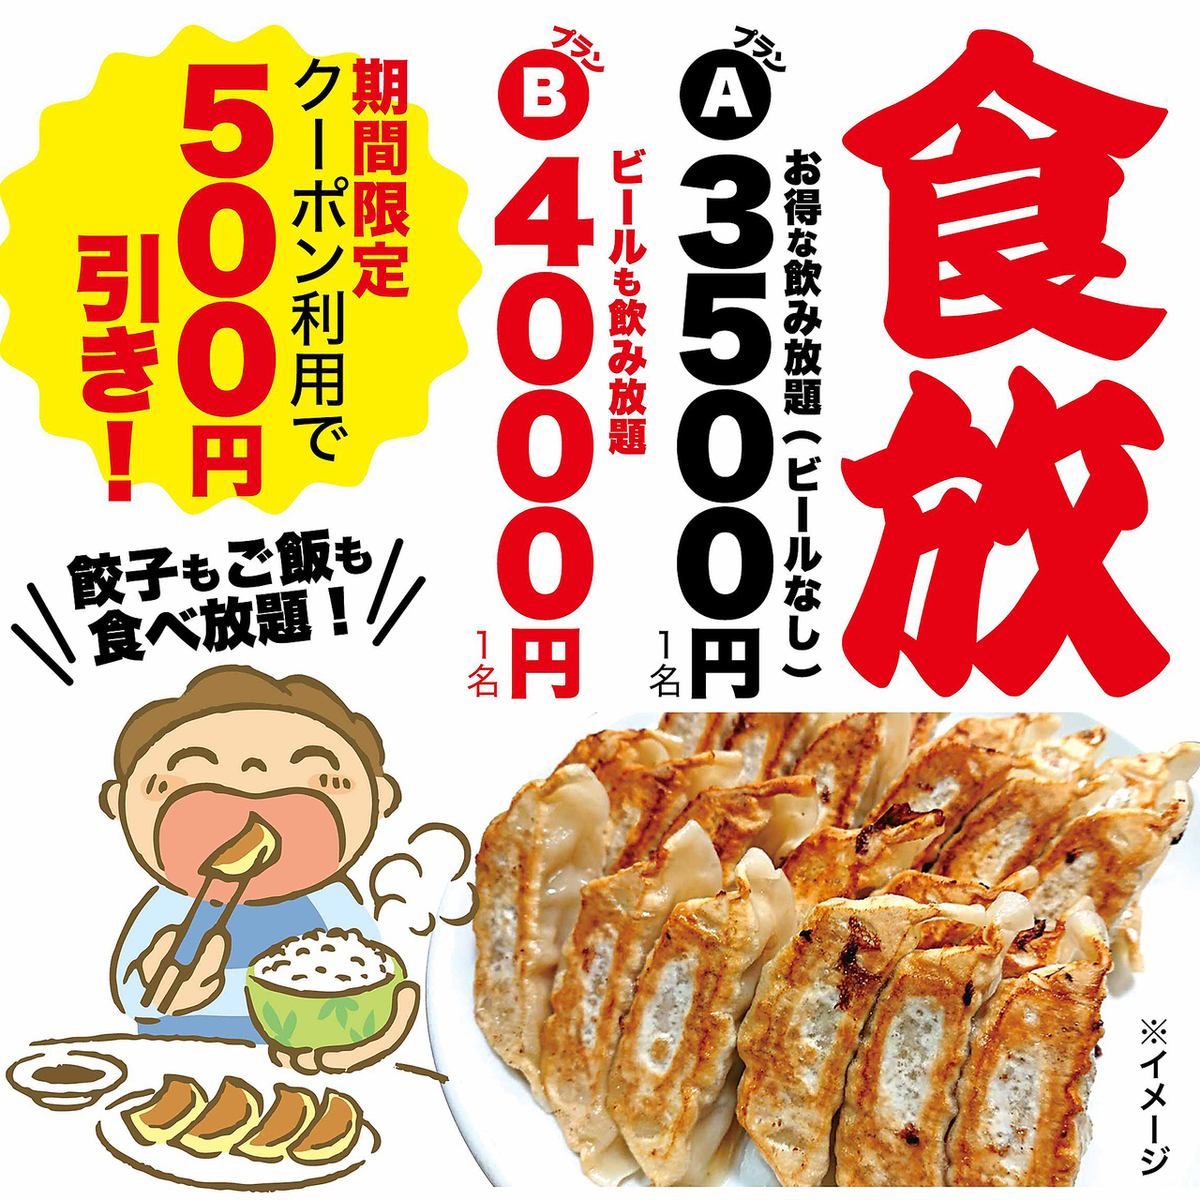 Very popular! All-you-can-eat gyoza! 500 yen off when you reserve online